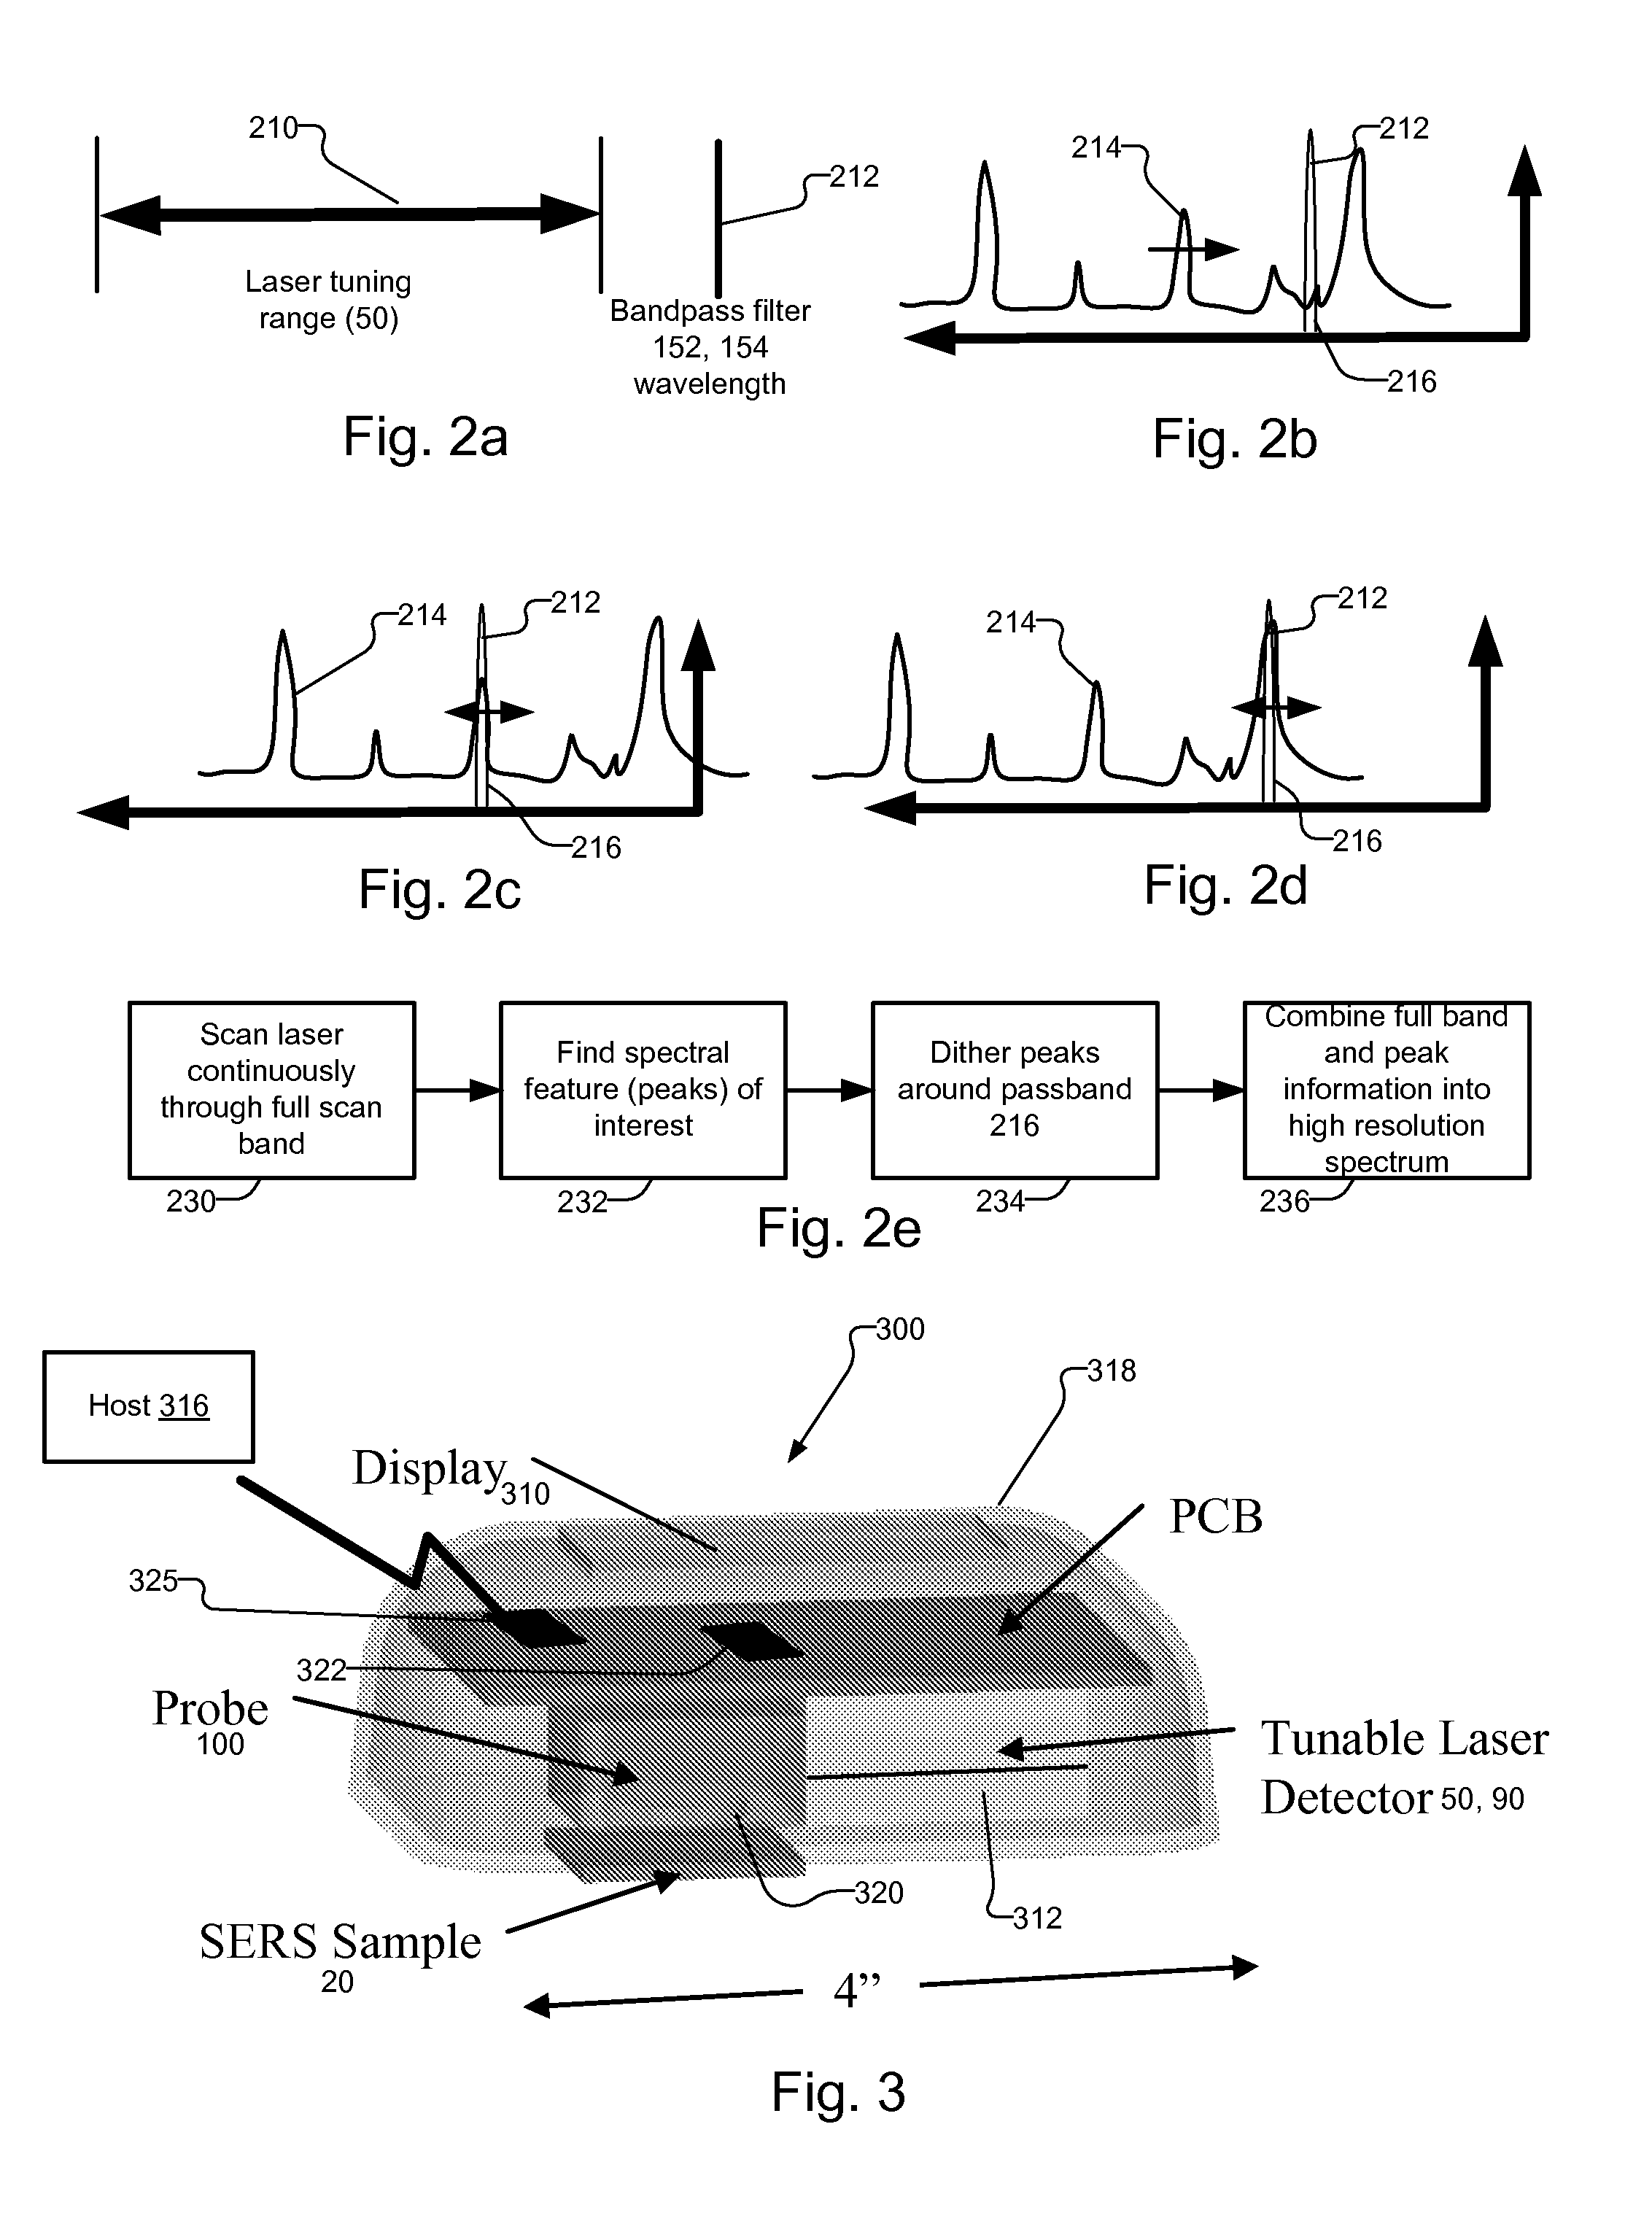 Low pixel count tunable laser raman spectroscopy system and method